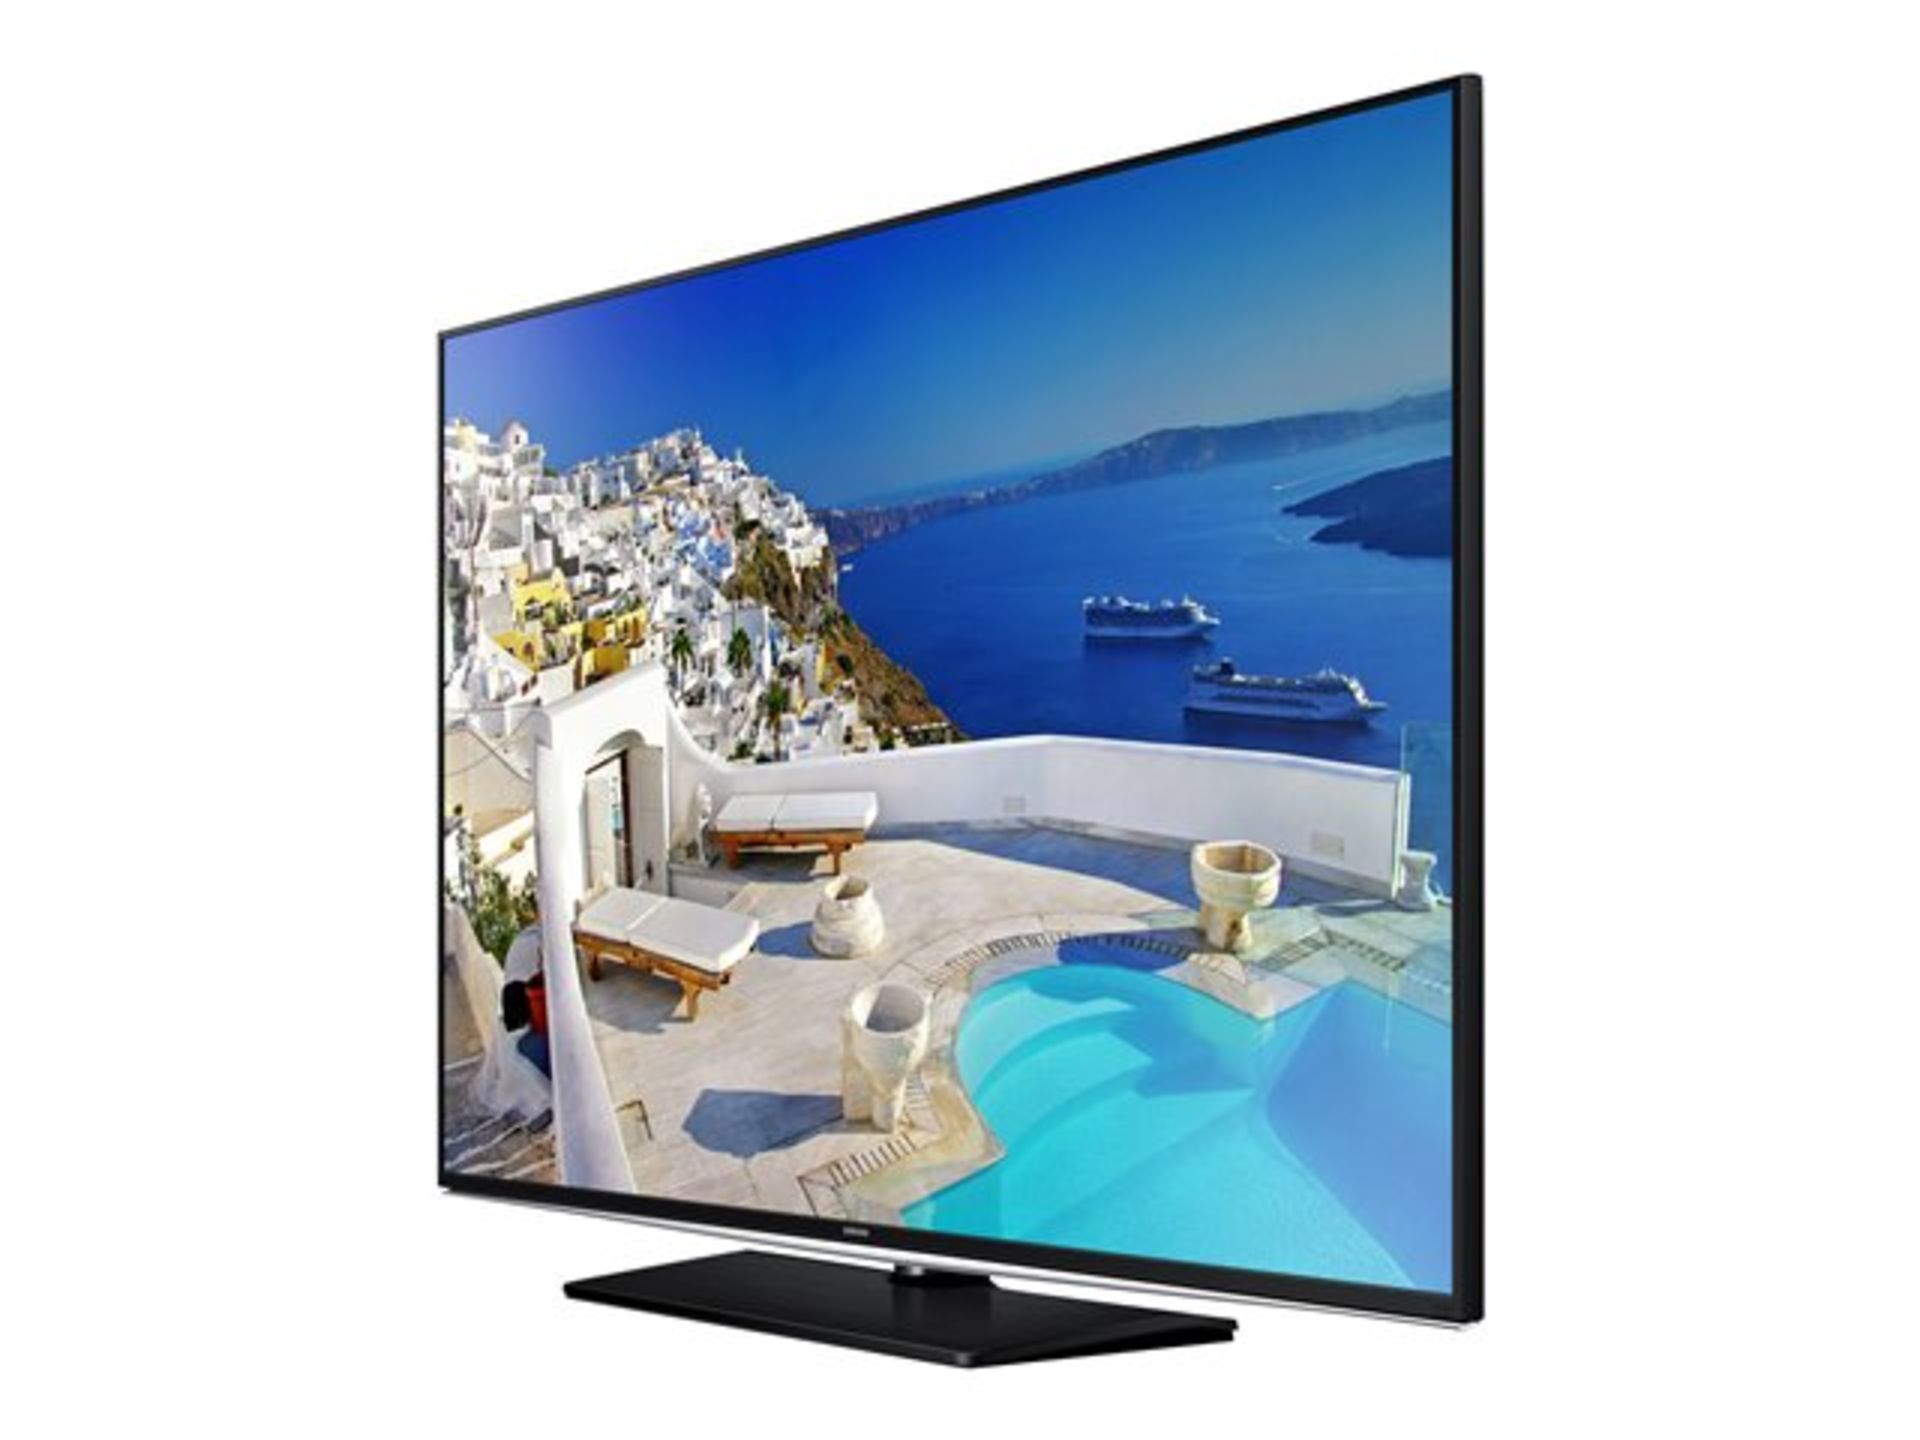 V Grade A Samsung 55" Commercial LED Display Full HD SMART TV With SMART View And Free Weather - Image 2 of 4